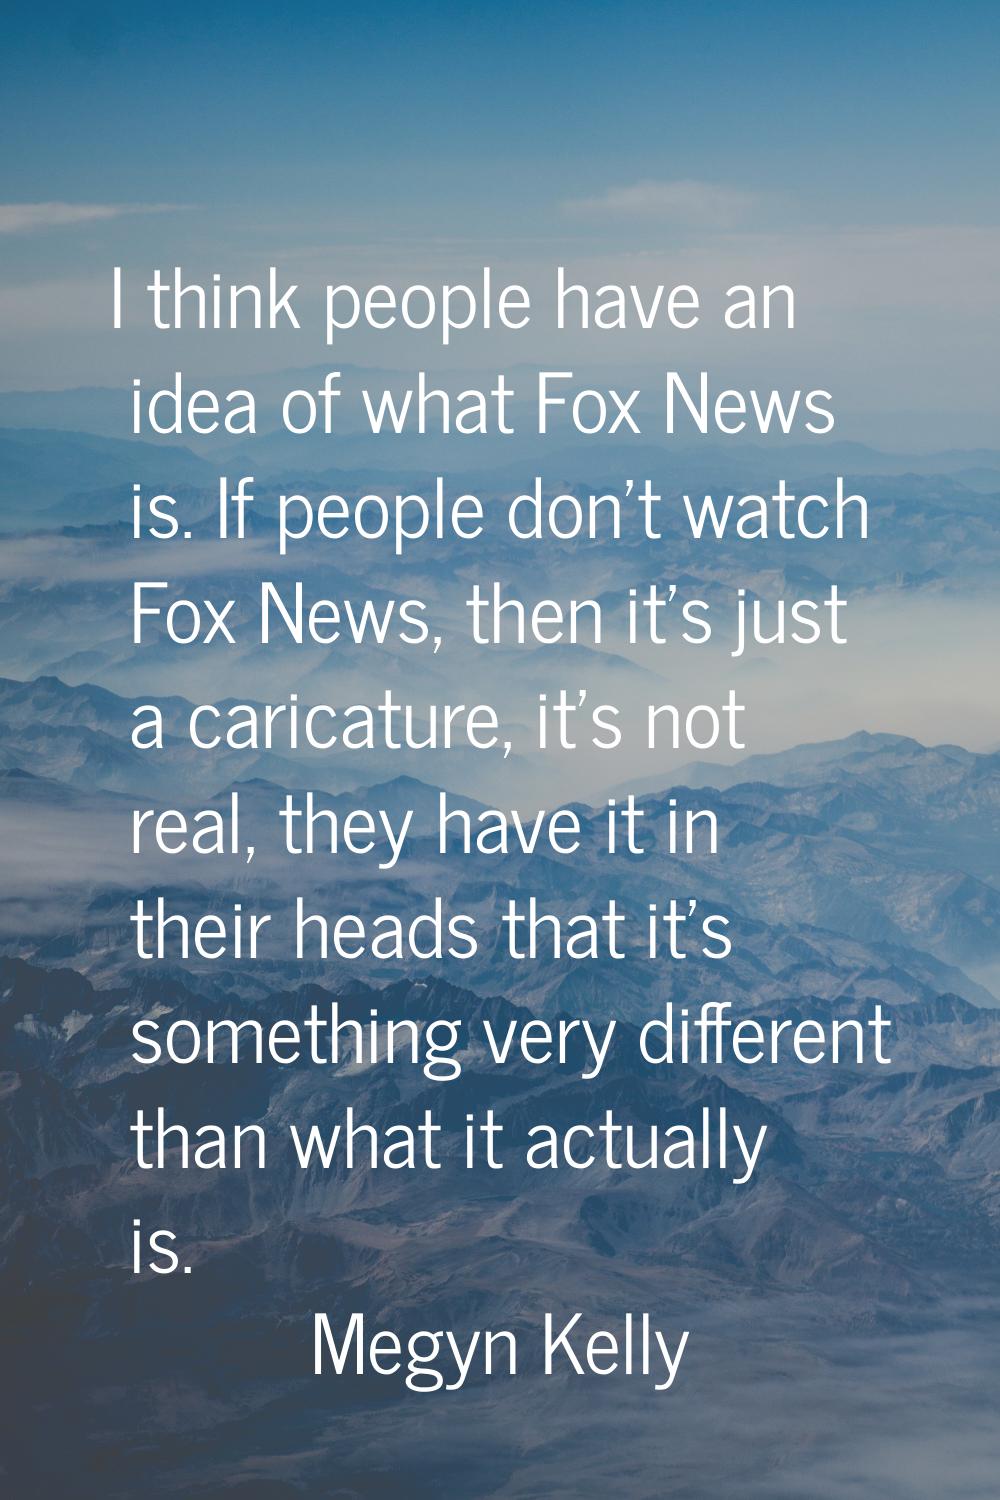 I think people have an idea of what Fox News is. If people don't watch Fox News, then it's just a c